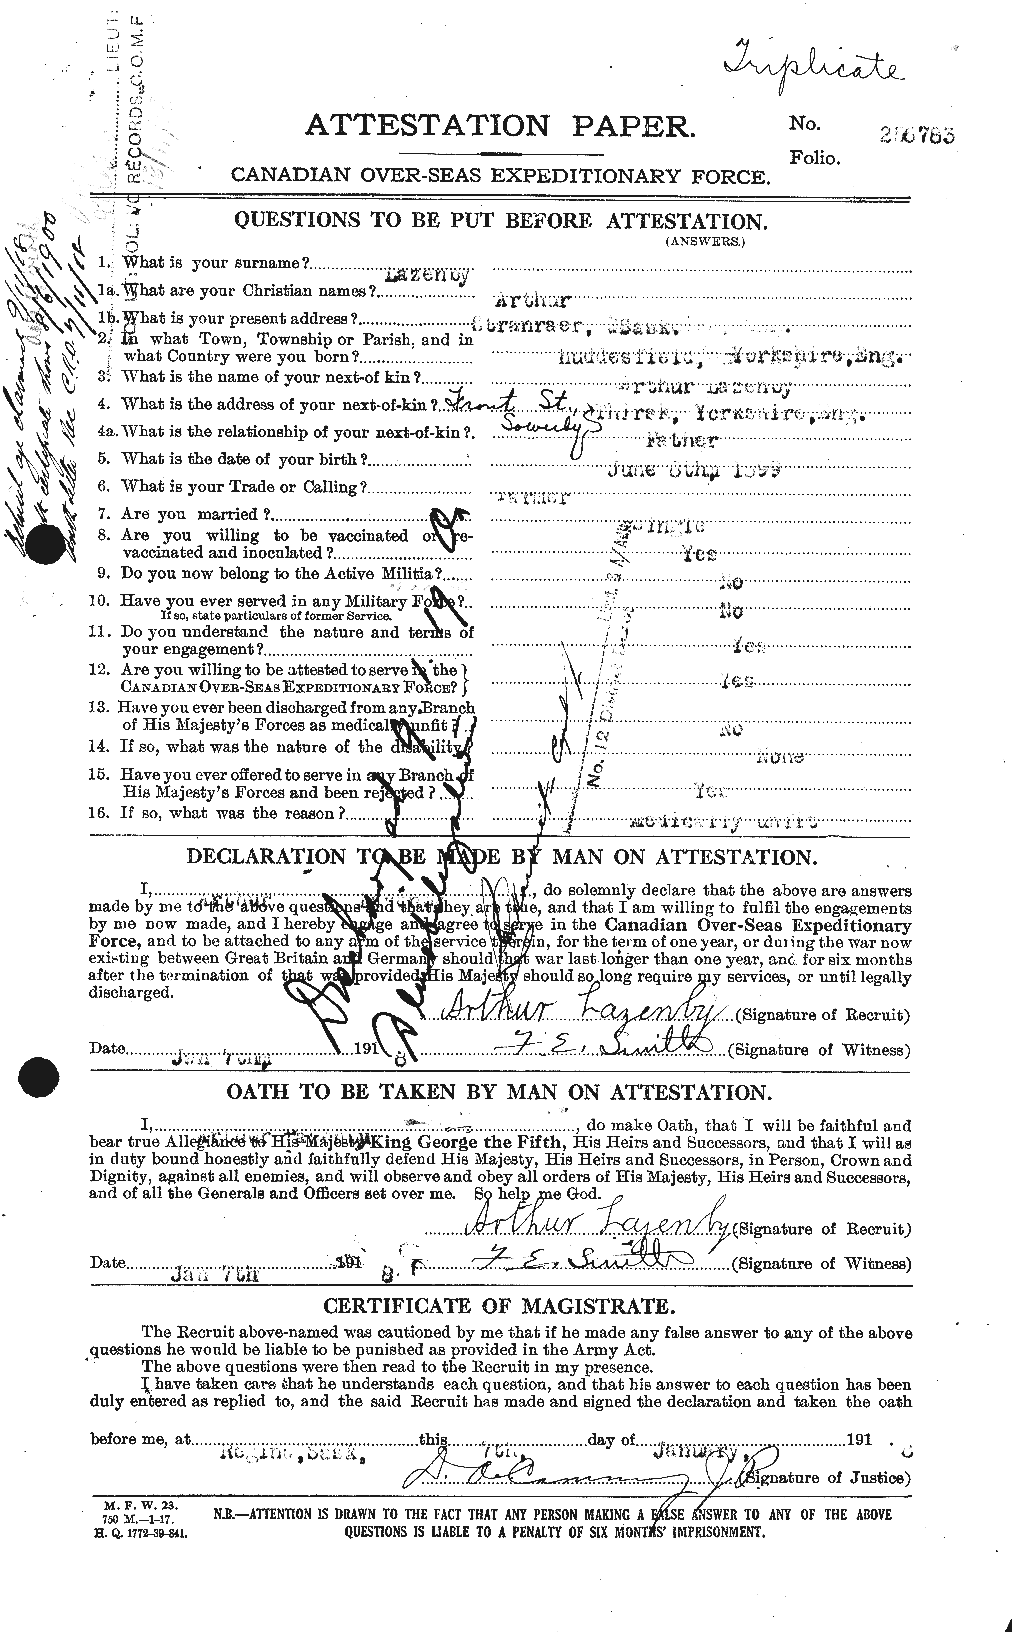 Personnel Records of the First World War - CEF 453196a